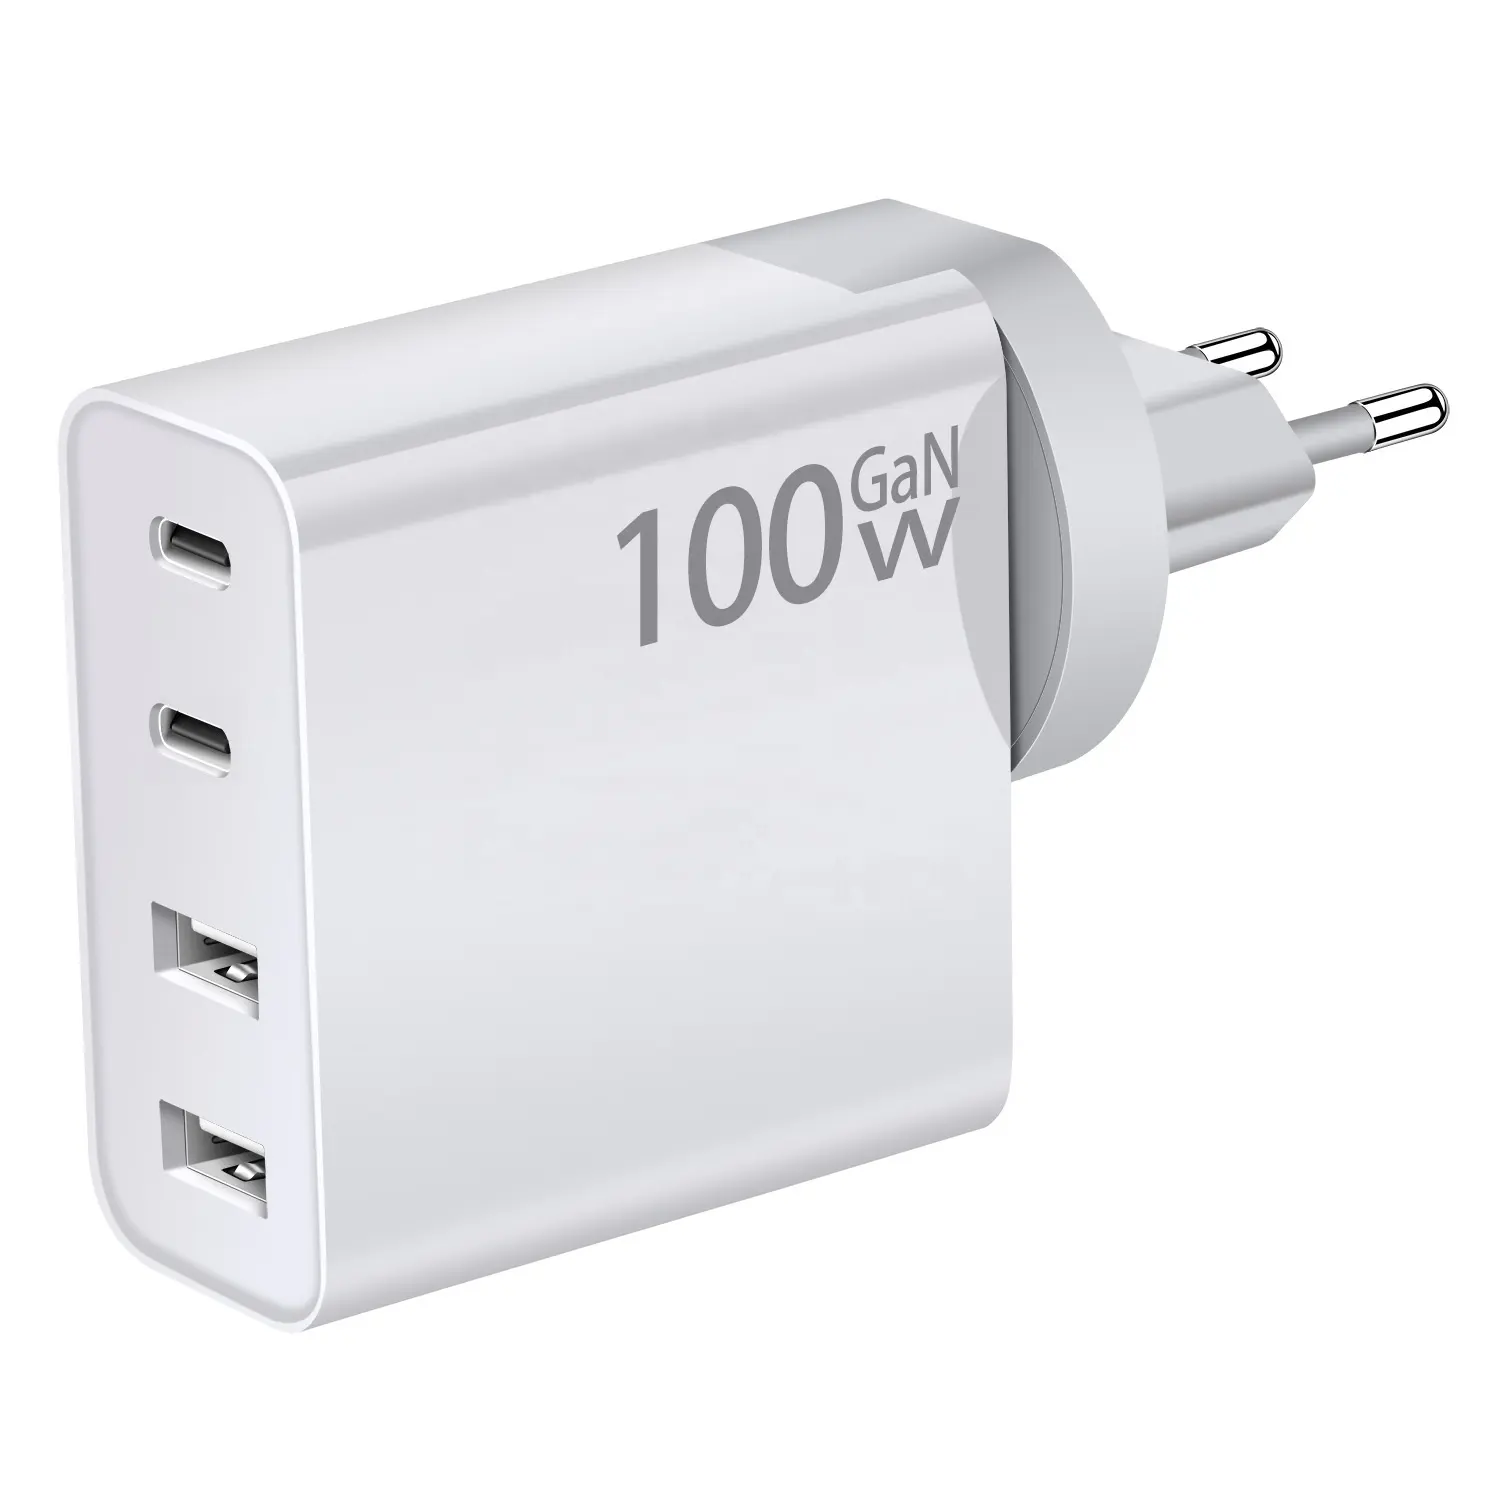 100W GaN 4-Ports USB C Desktop wall Charger PD100W QC3.0 Fast Charging Station for laptop mobile phone